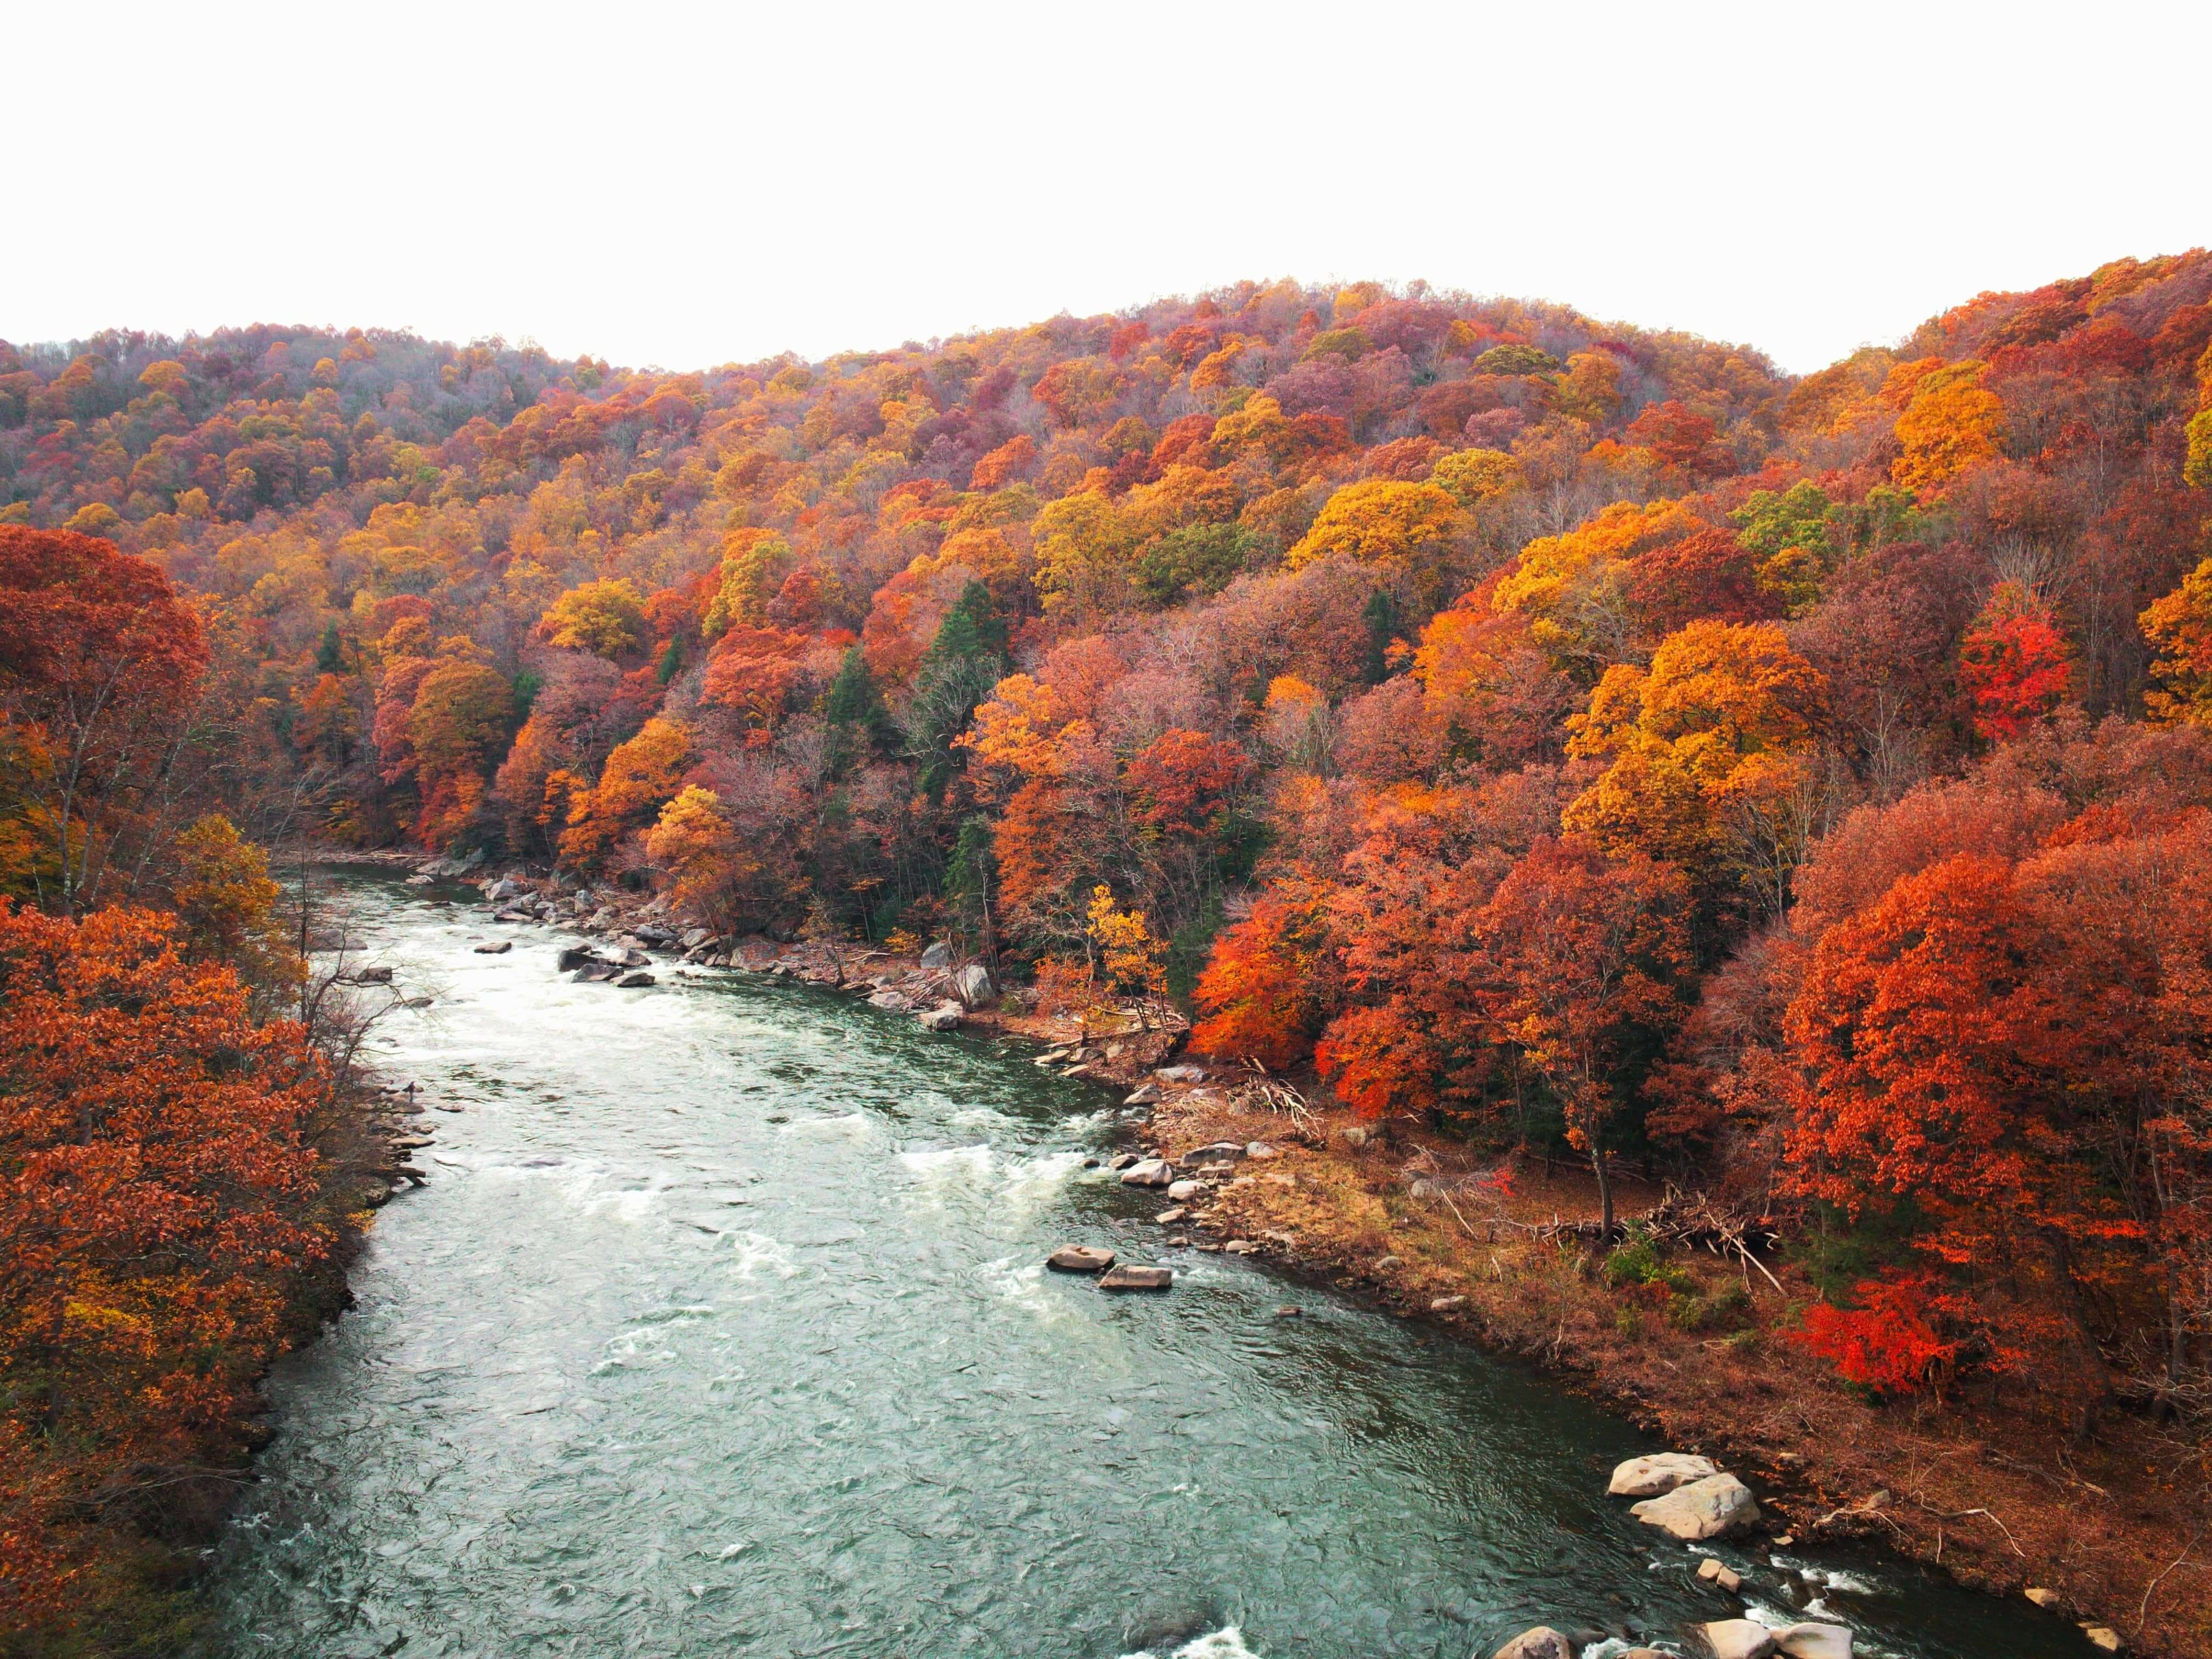 Lush red, orange, and yellow fall foliage covers the hills surrounding a powerful river along the Great Allegheny Passage e-bike trail